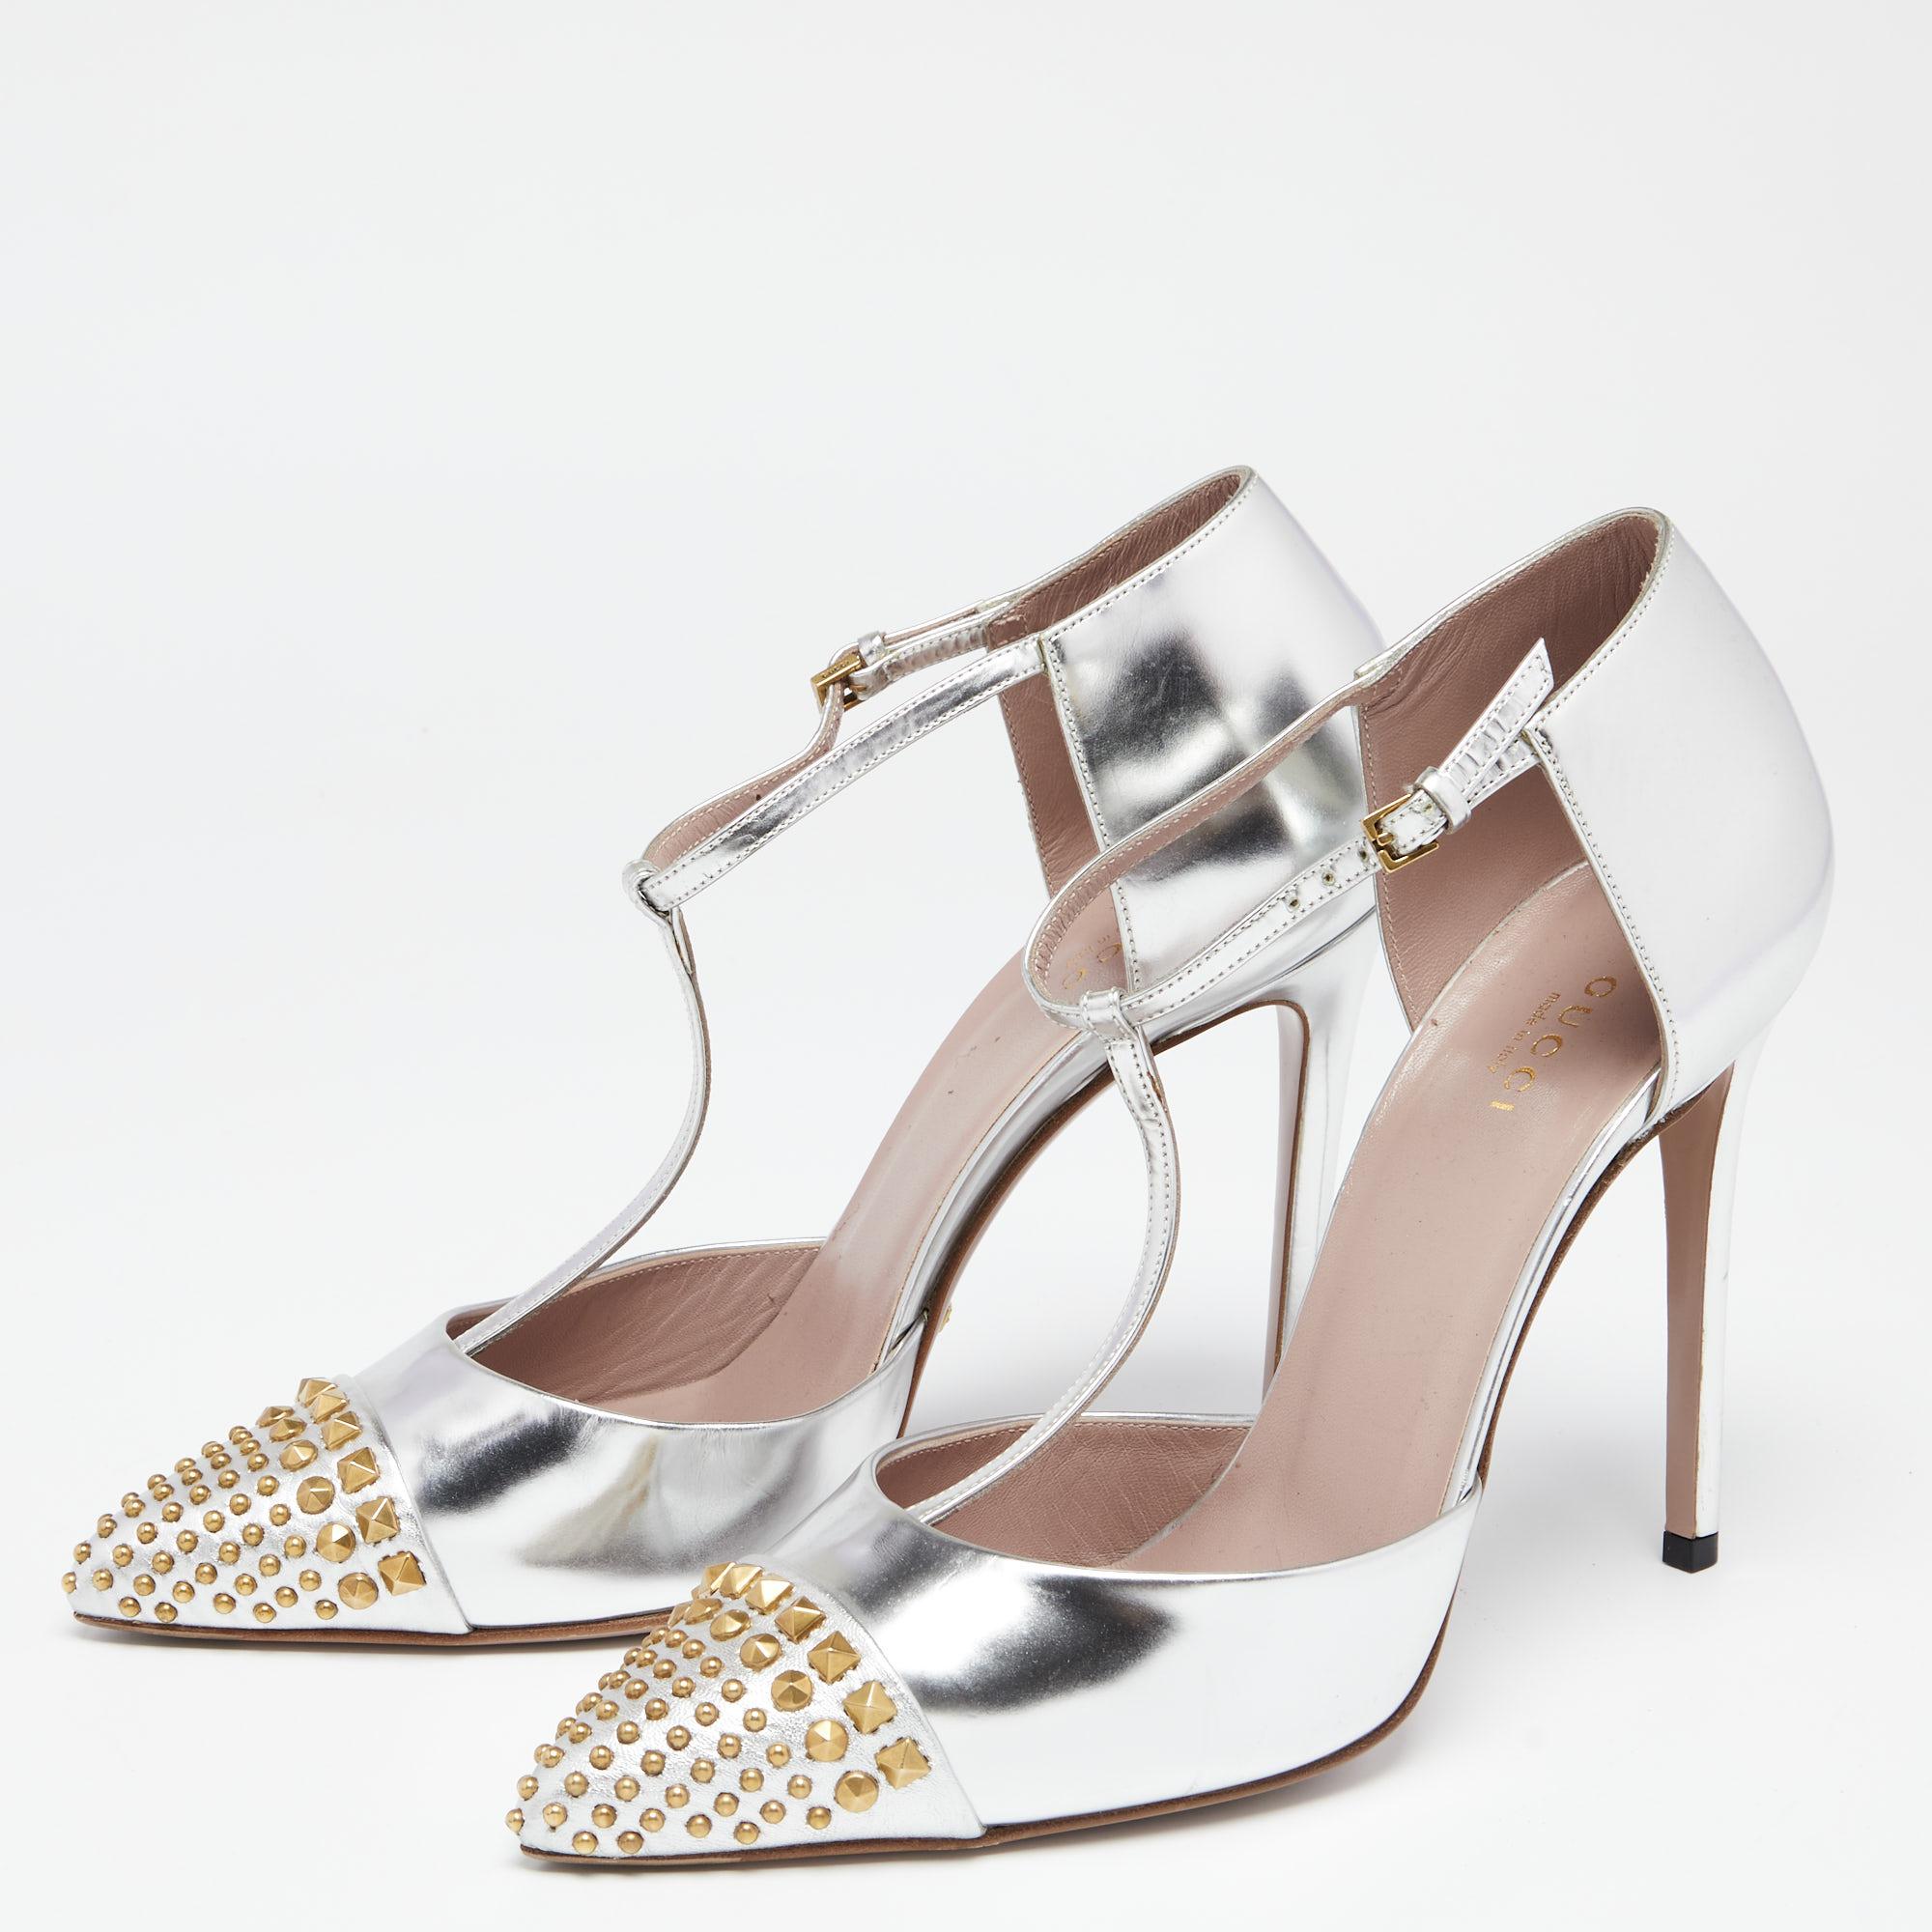 These stunning Coline pumps are a true testament to Gucci's unique style and skilled design. They are made from silver leather and comprise a T-strap, gold-toned studded pointed toes, and sleek heels. Match them with your outfit to flaunt a luxe